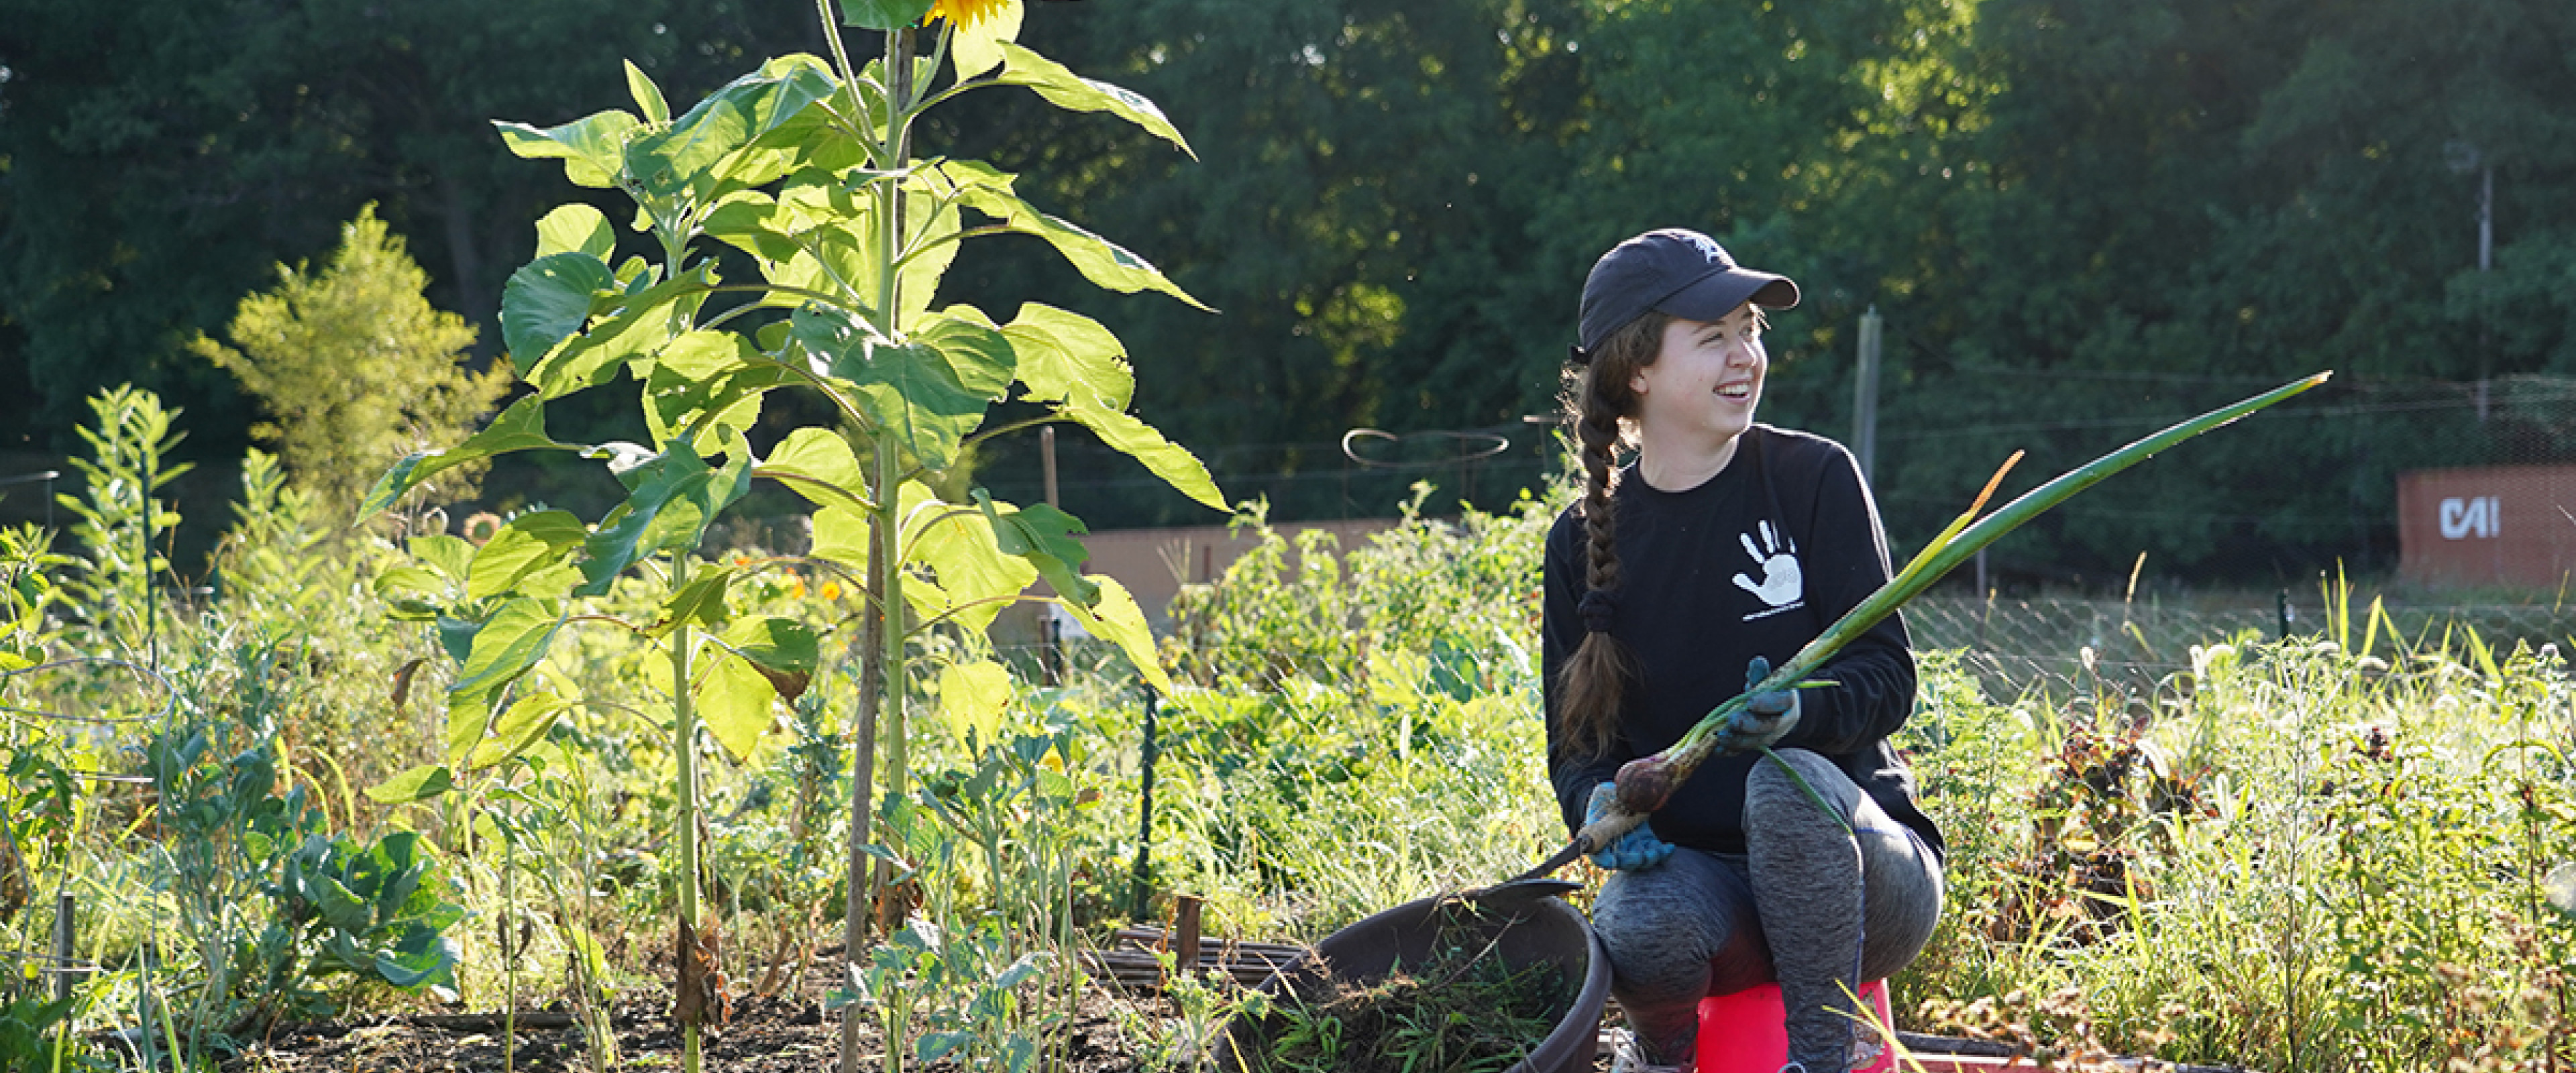 A student working in the WMU Community Garden.